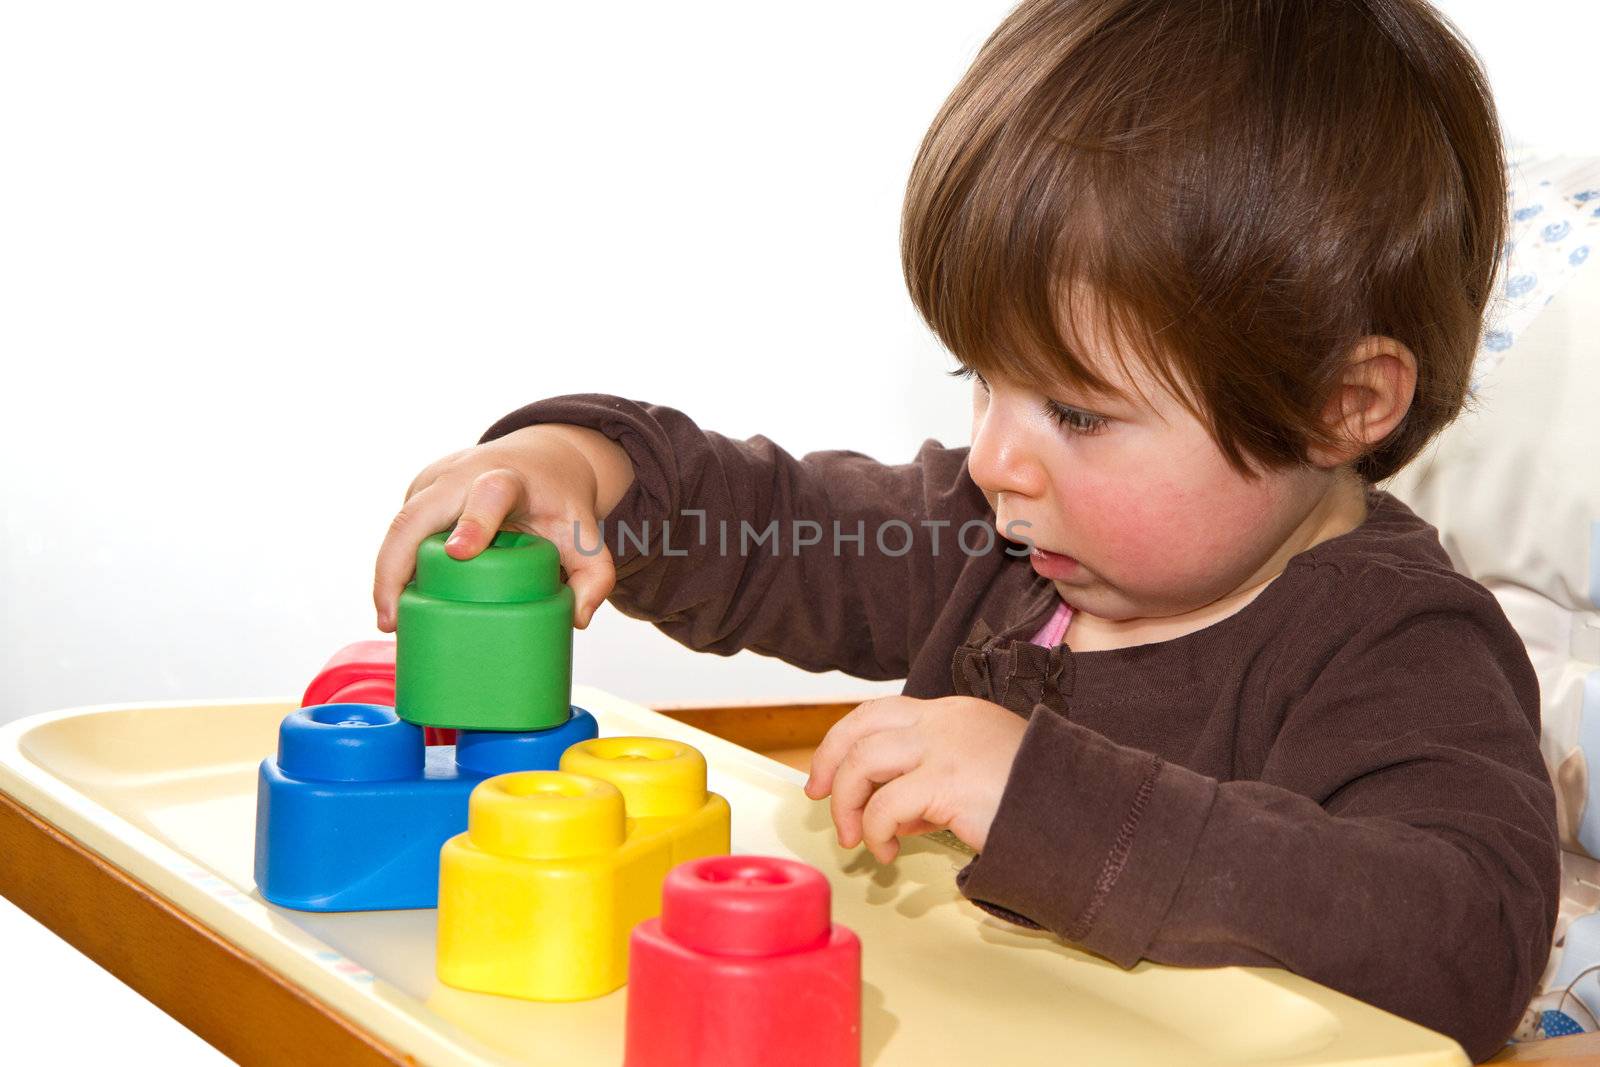 little girl playing with colorful blocks